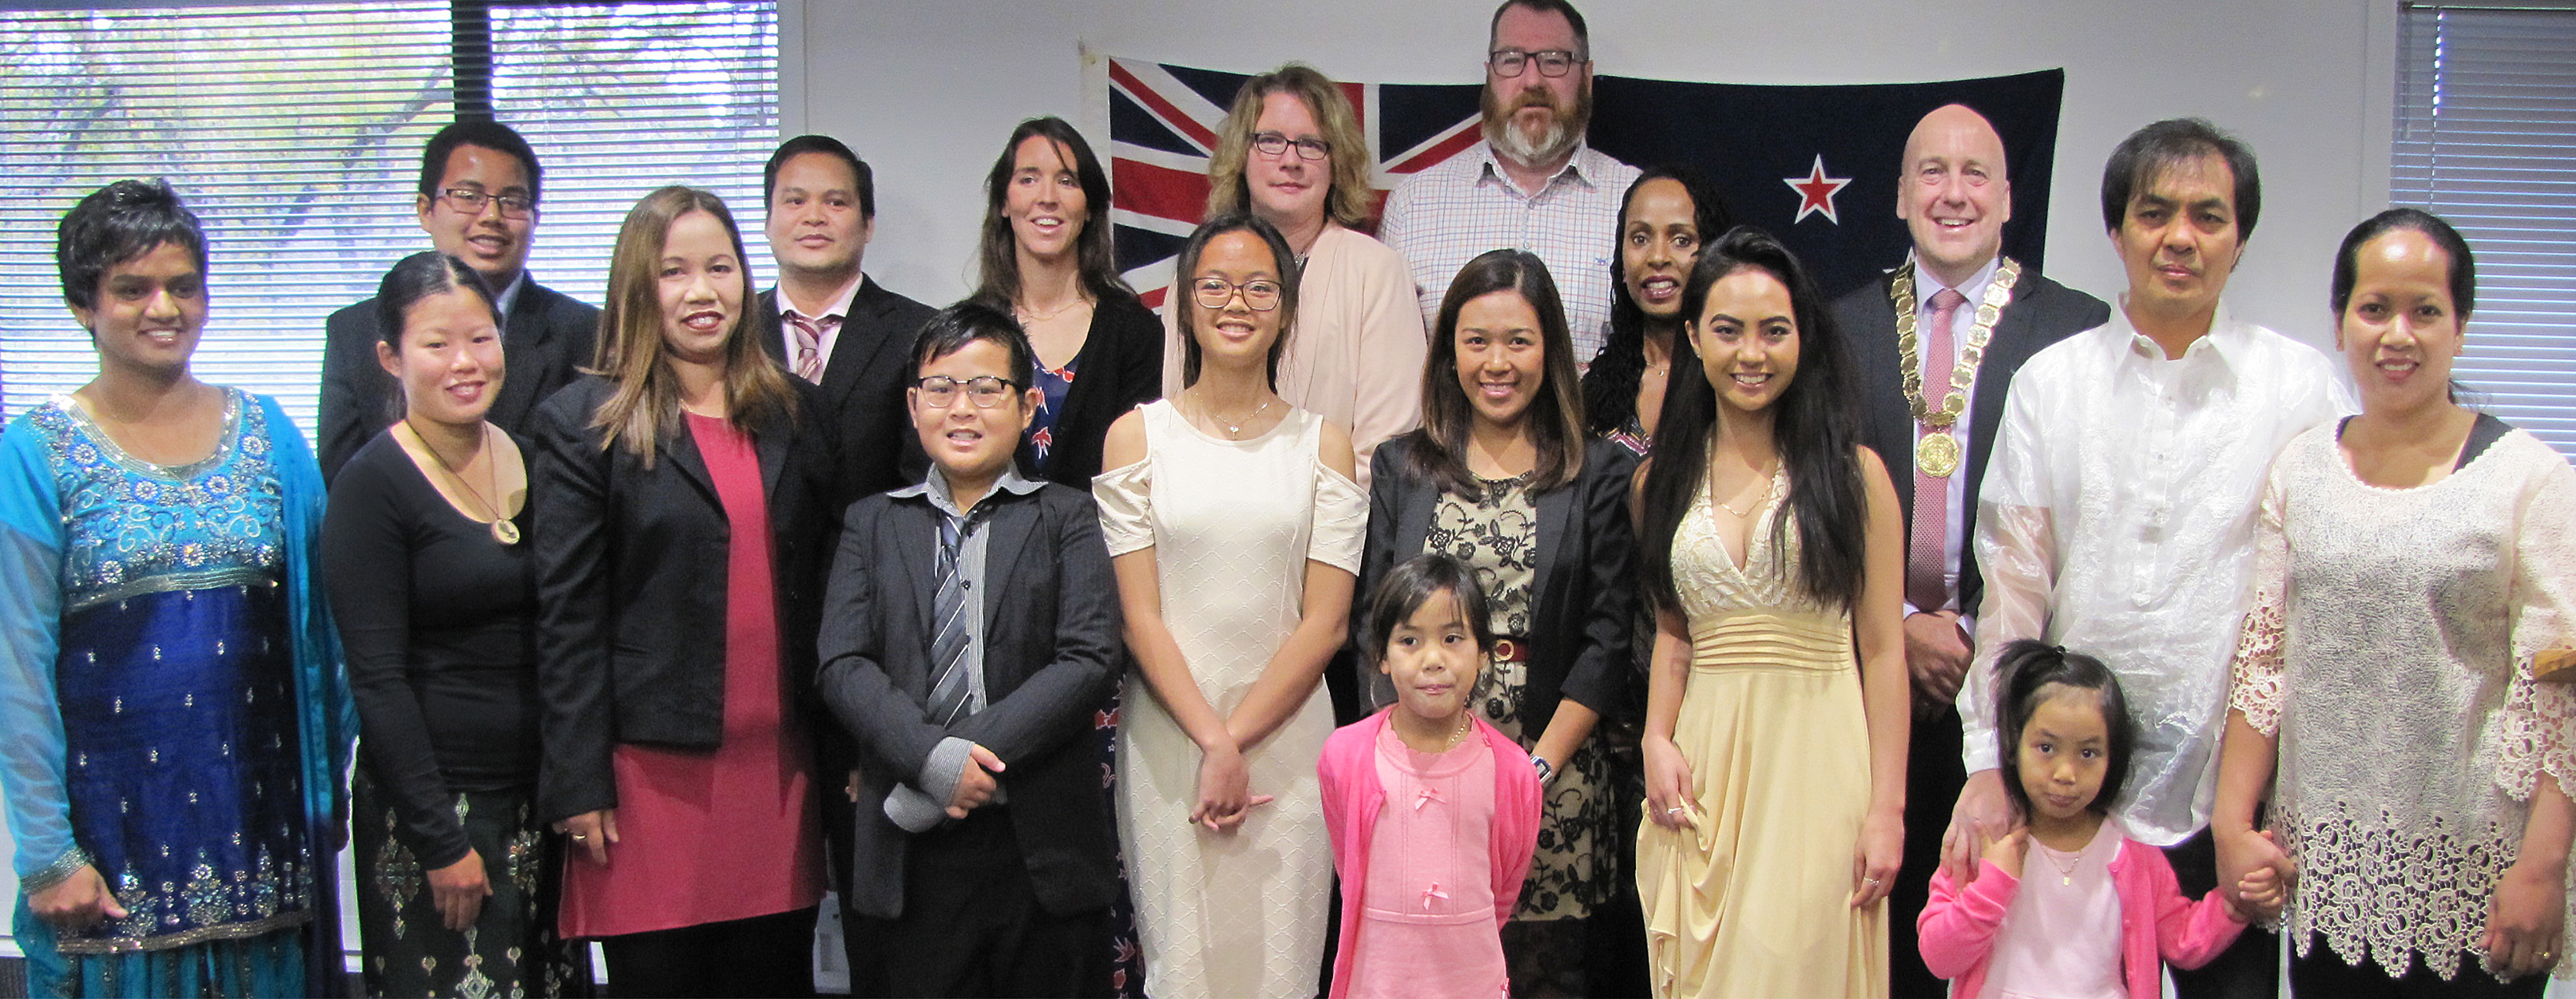 Central Otago Mayor Tim Cadogan poses with  the region’s newest New Zealand citizens after a...